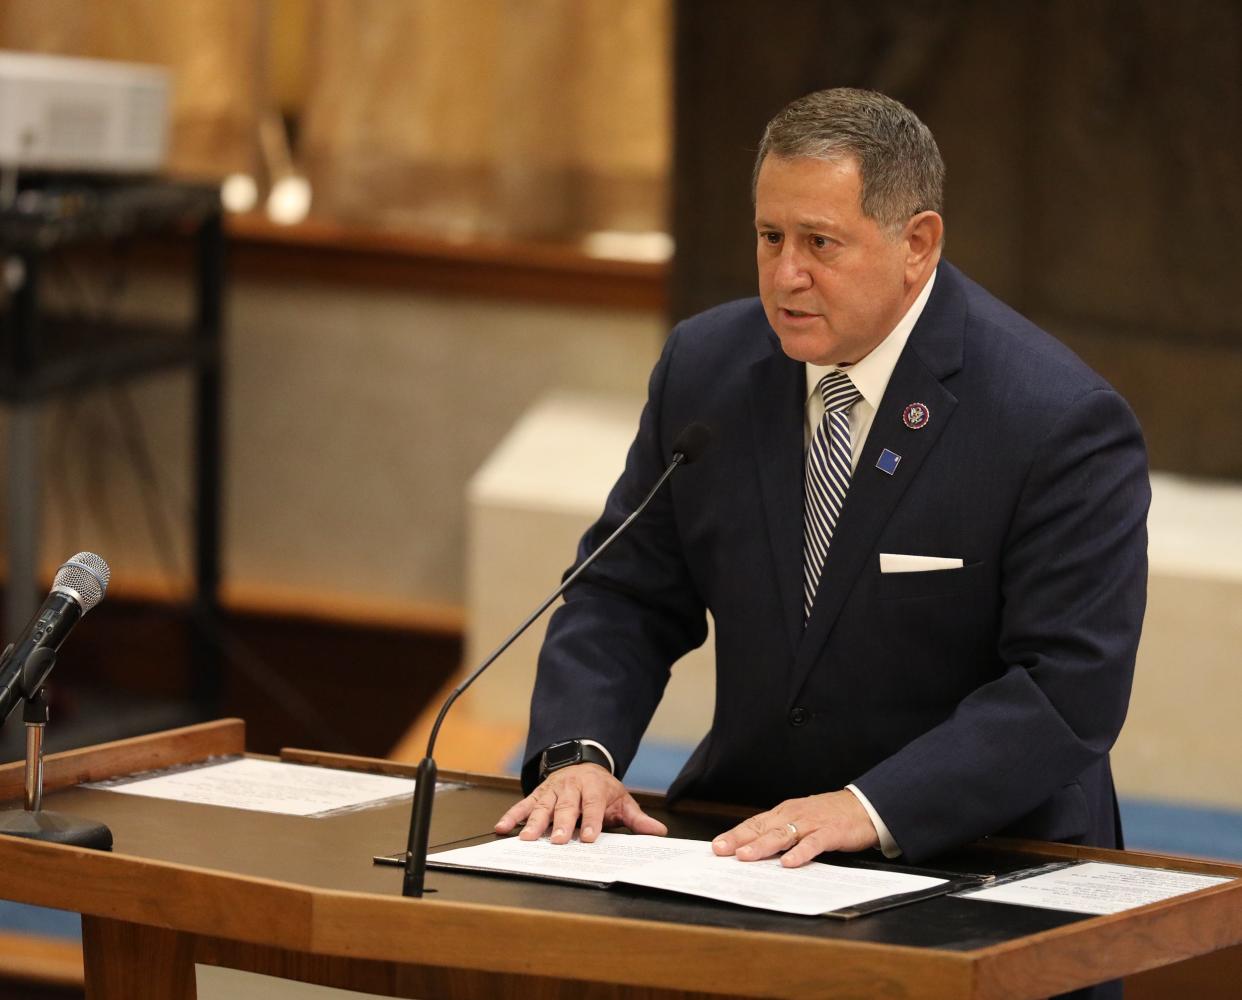 U.S. Congressman Joe Morelle spoke briefly asking people to pray for the people of Israel and pray for a world free from war and destruction.